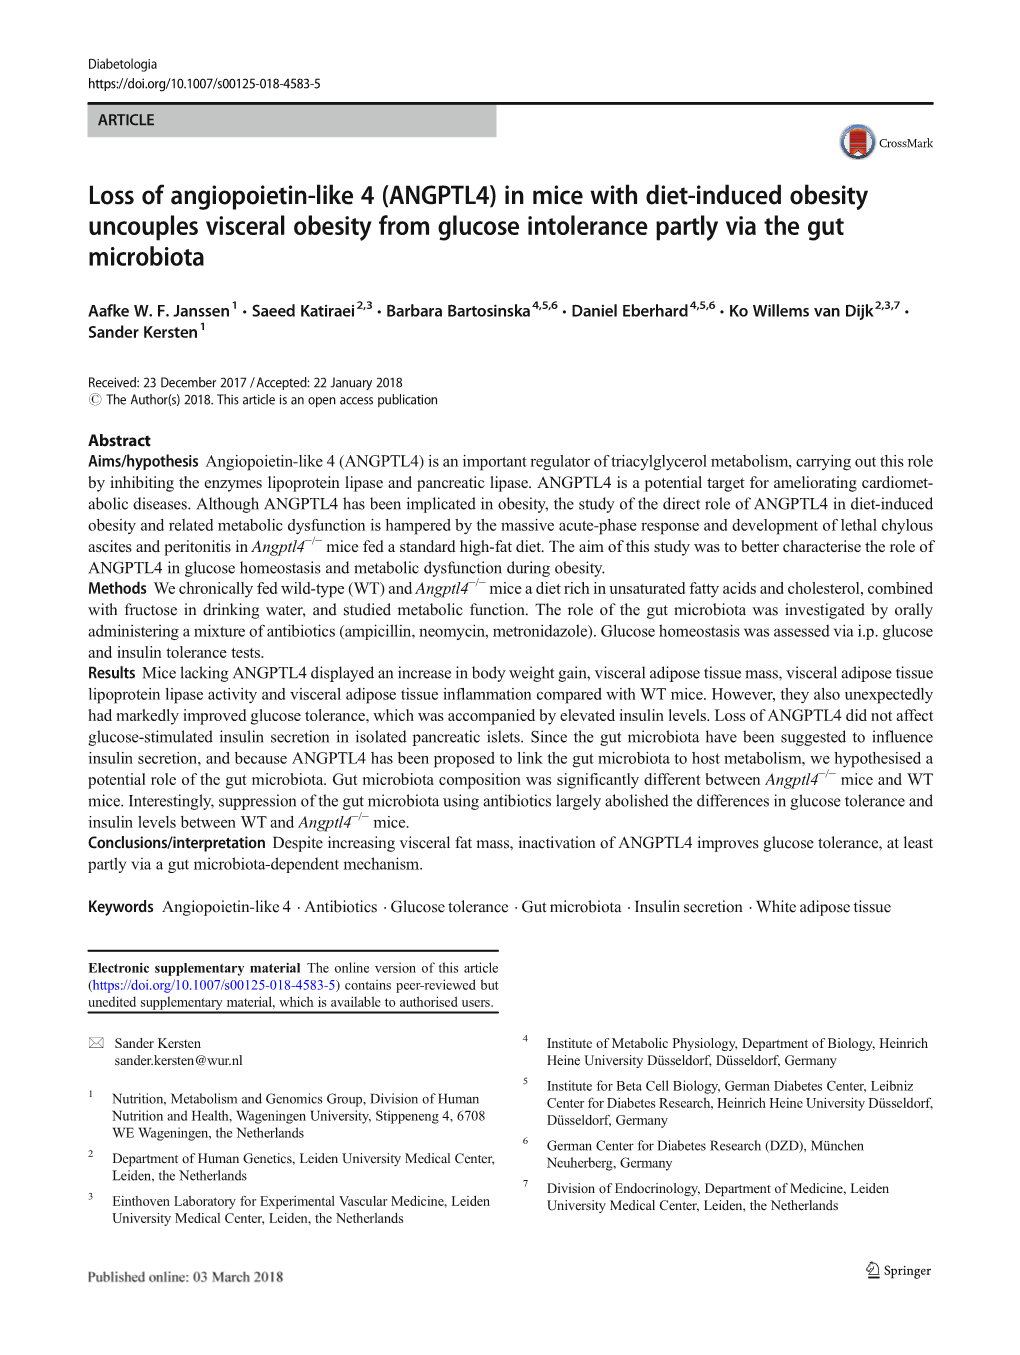 Loss of Angiopoietin-Like 4 (ANGPTL4) in Mice with Diet-Induced Obesity Uncouples Visceral Obesity from Glucose Intolerance Partly Via the Gut Microbiota